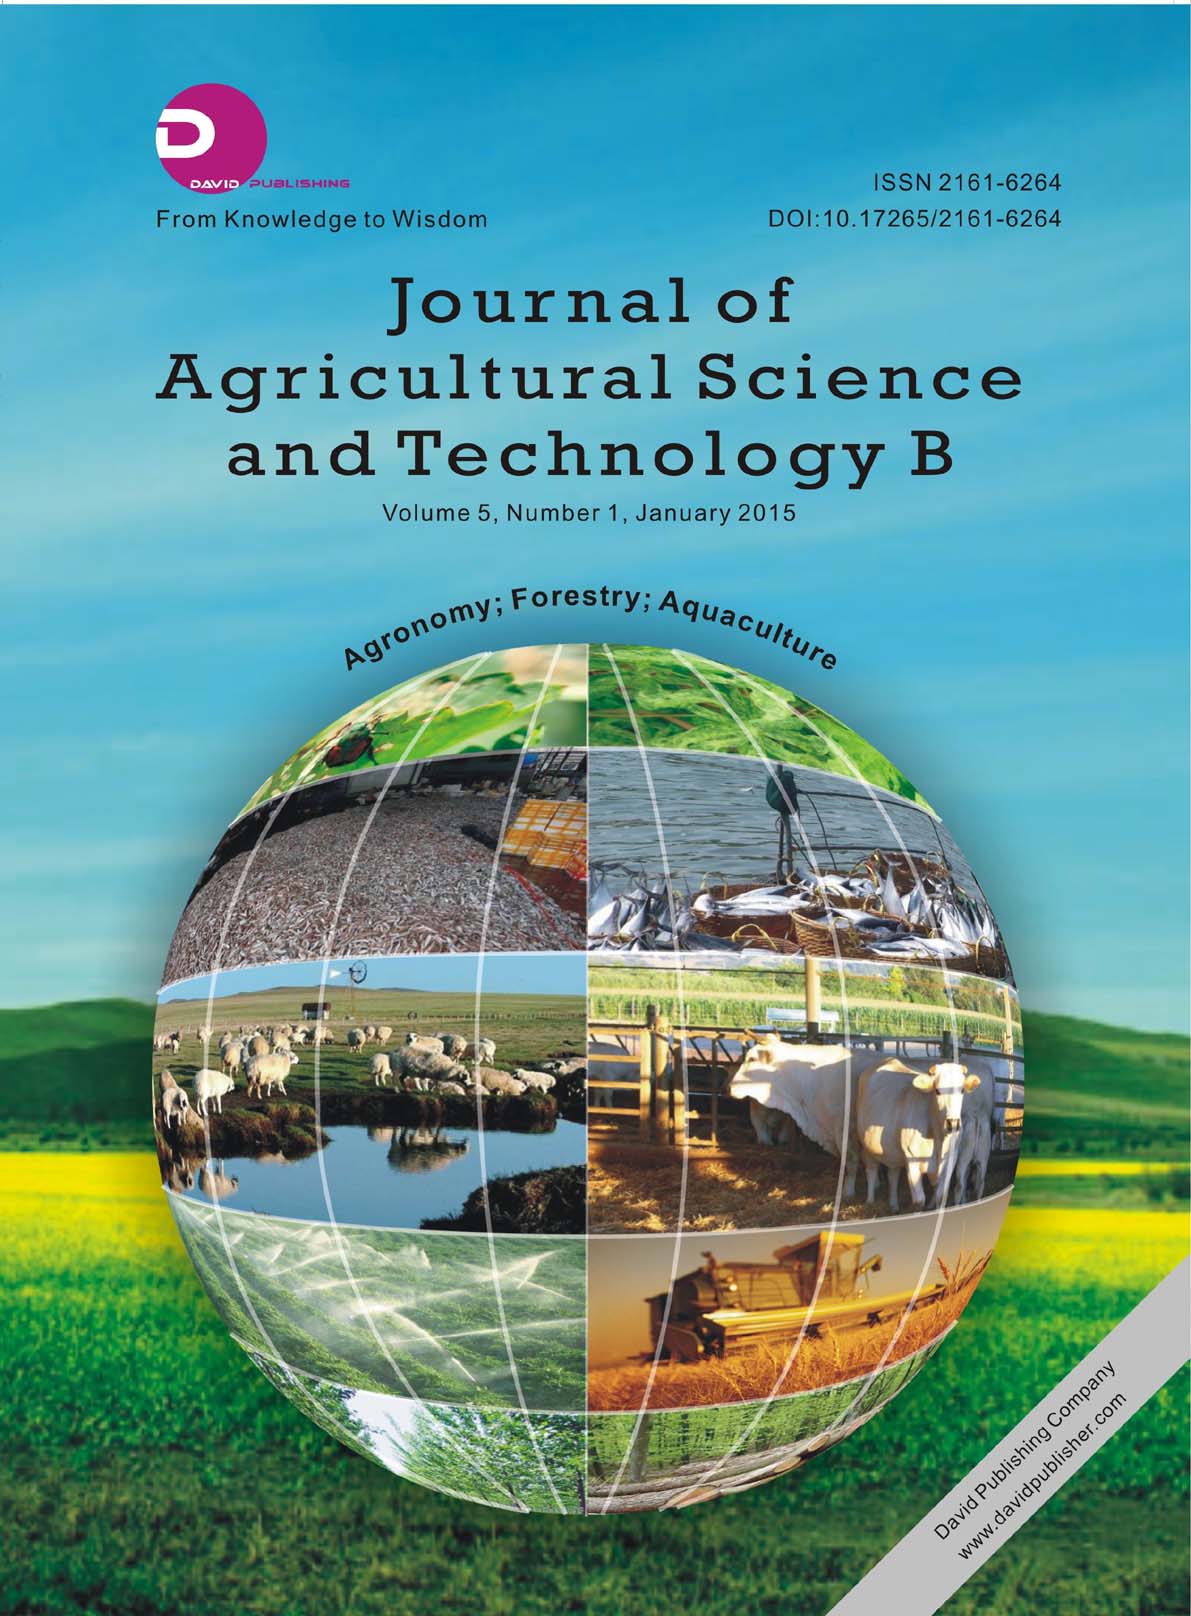 Journal of Agricultural Science and Technology B